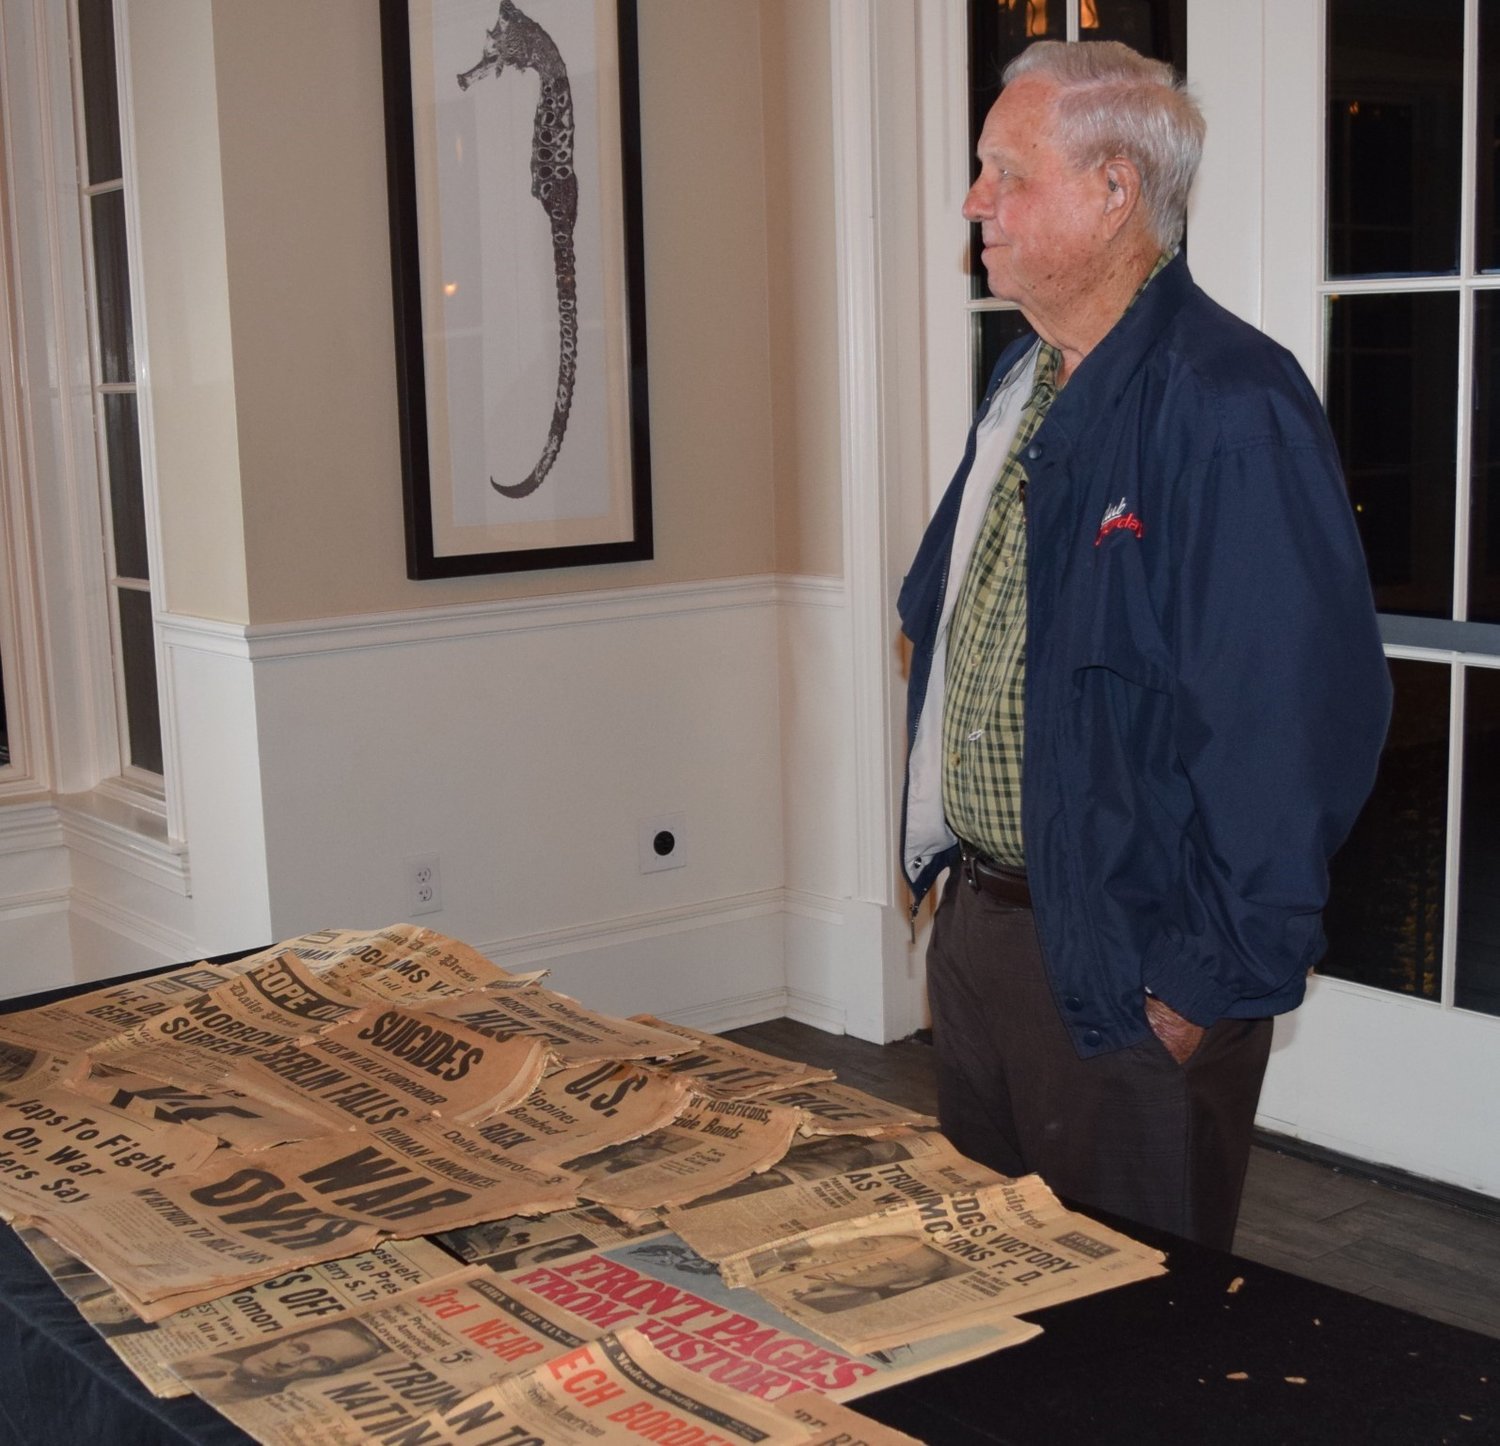 Don Prince, a veteran who fought in Korea, brought a footlocker full of original newspapers from World War II for guests to view.